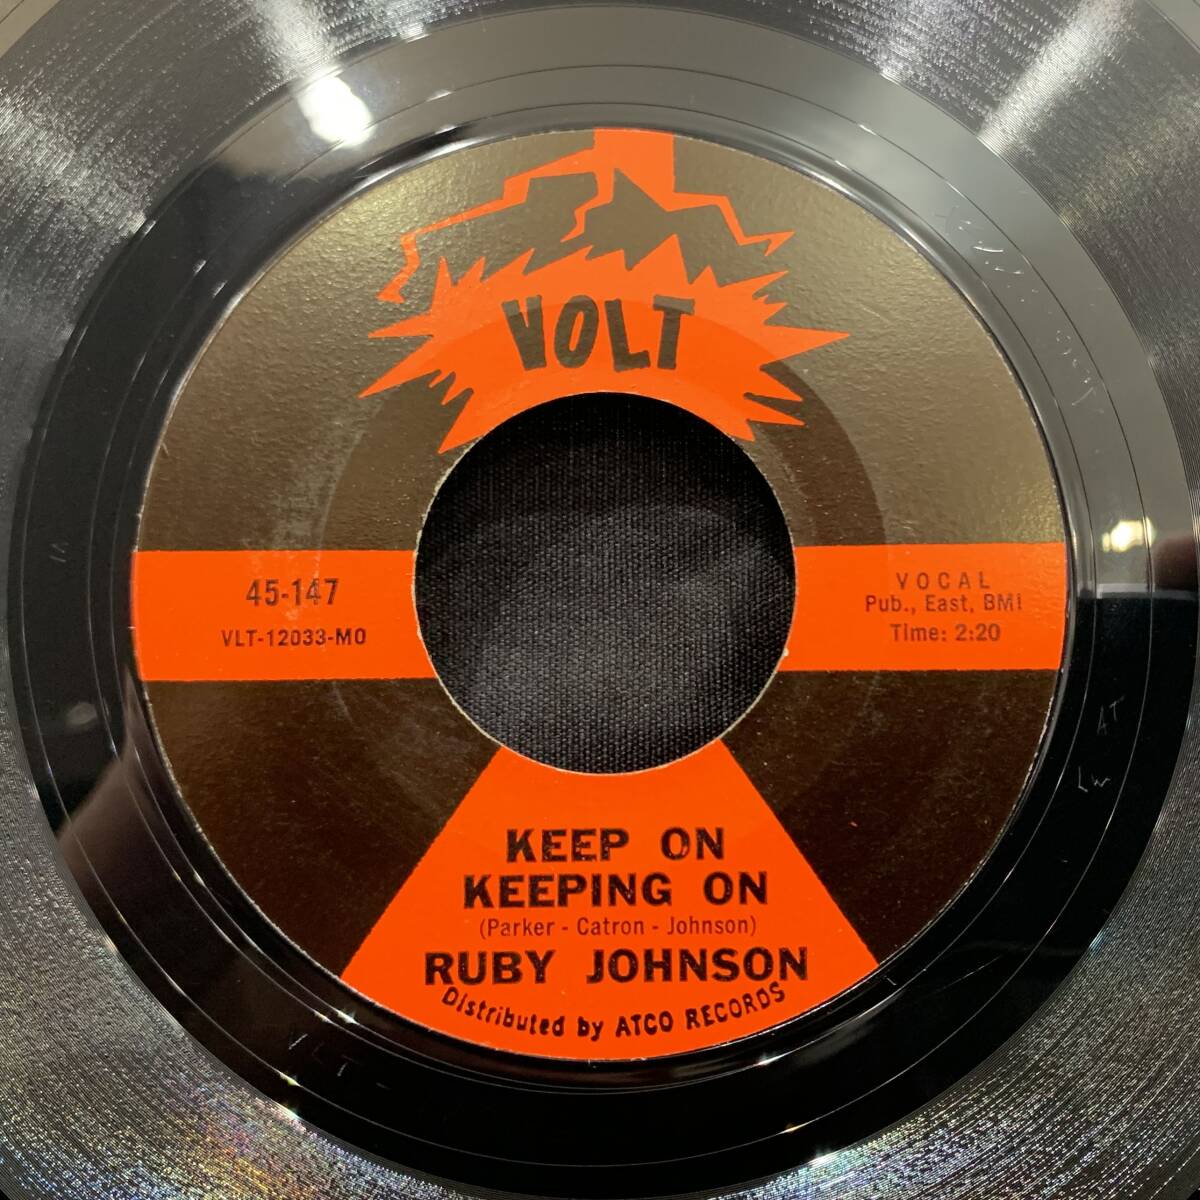 【EP】Ruby Johnson - If I Ever Needed Love (I Sure Do Need It Now) / Keep On Keeping On 1967年USオリジナル MO Volt 45-147 _画像2